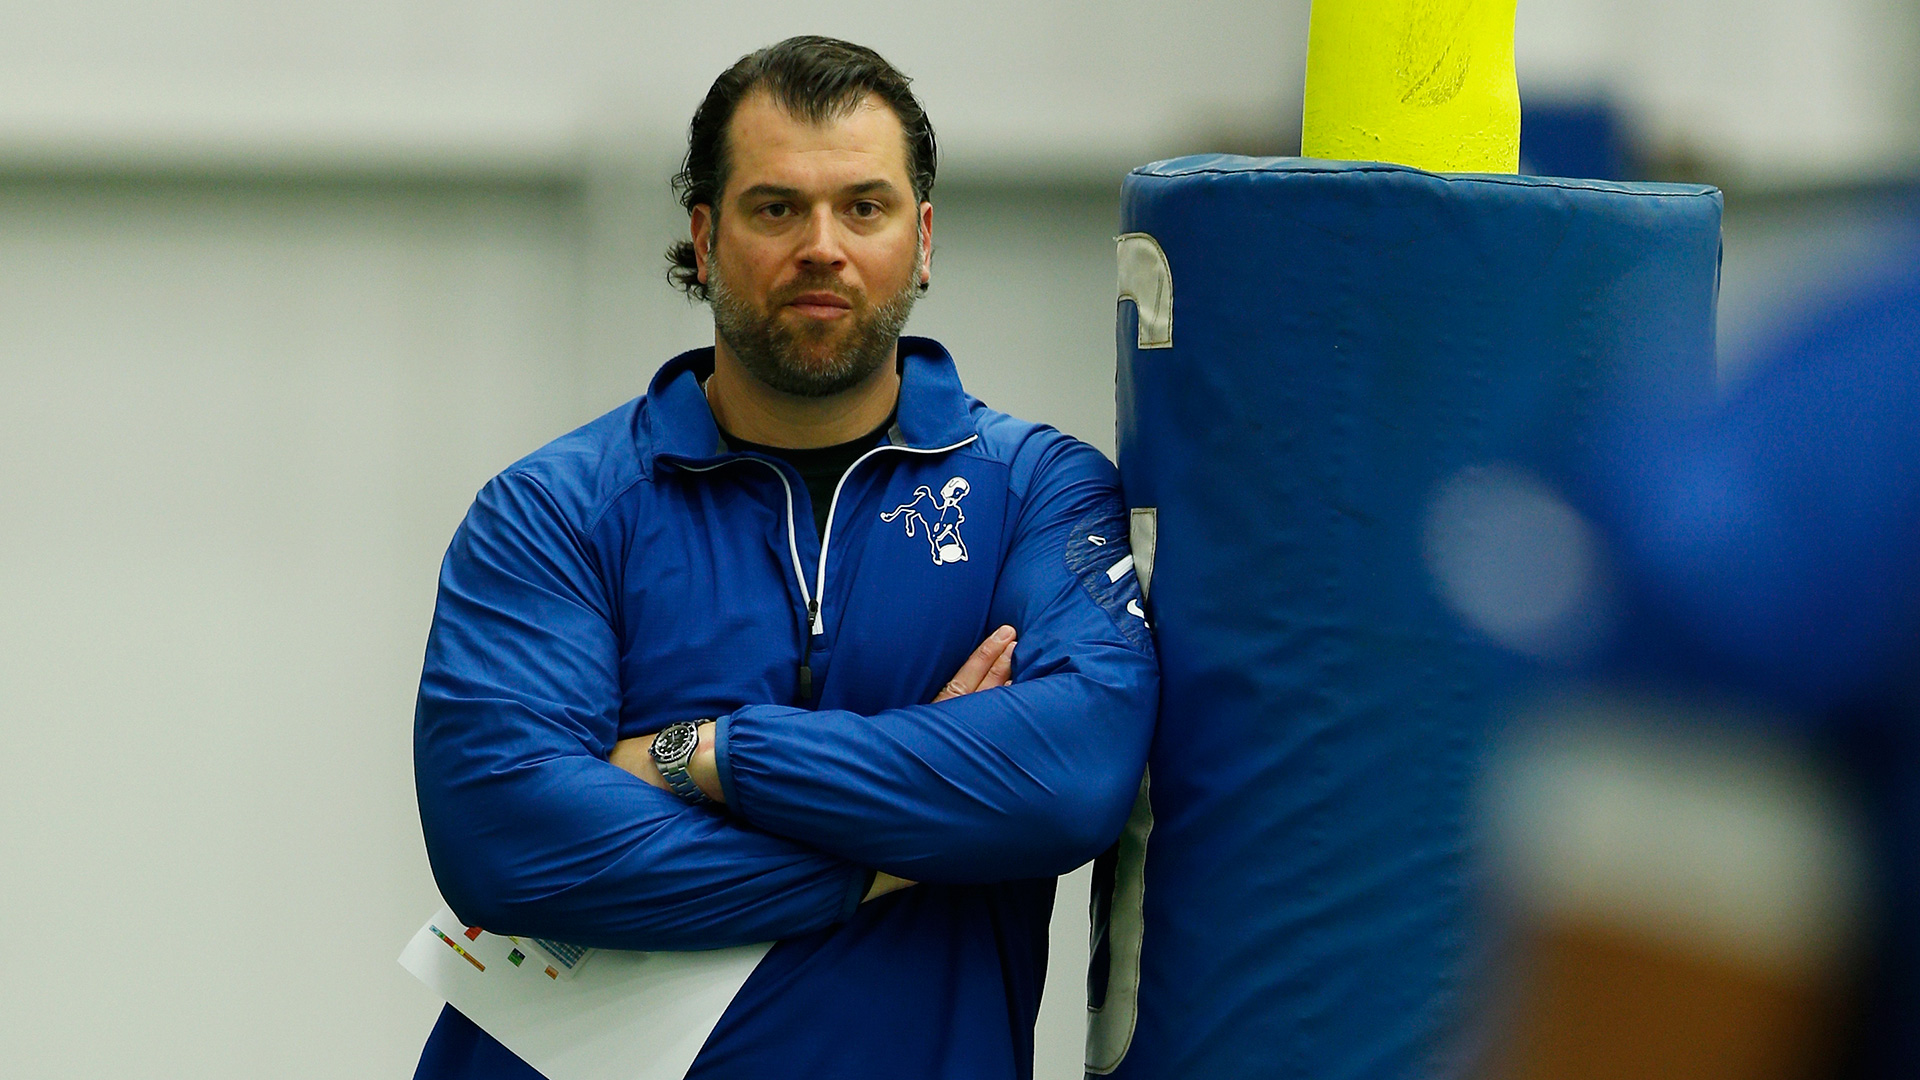 Ex-Colts GM Ryan Grigson admits personal shortcomings to blame for firing